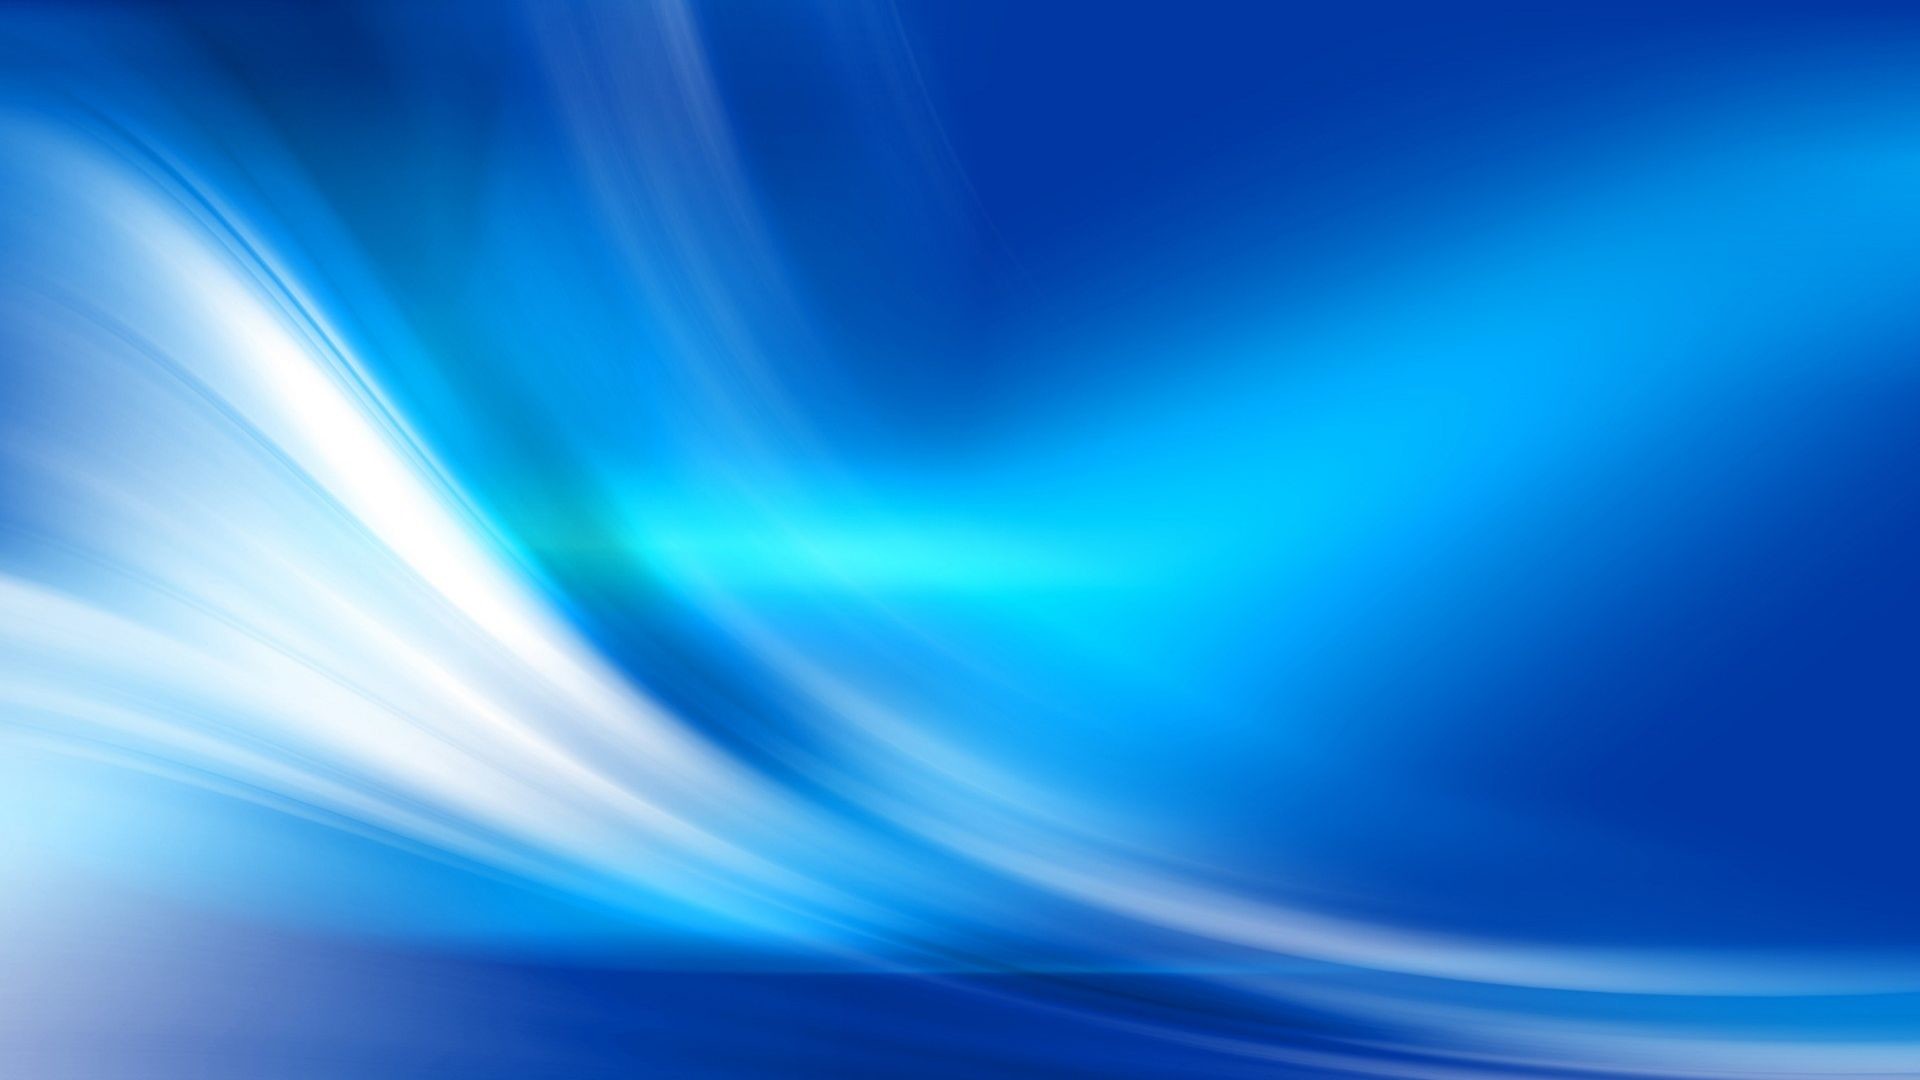 1920x1080 Abstract Backgrounds Blue Resolution X Free 93083 Wallpaper wallpaper